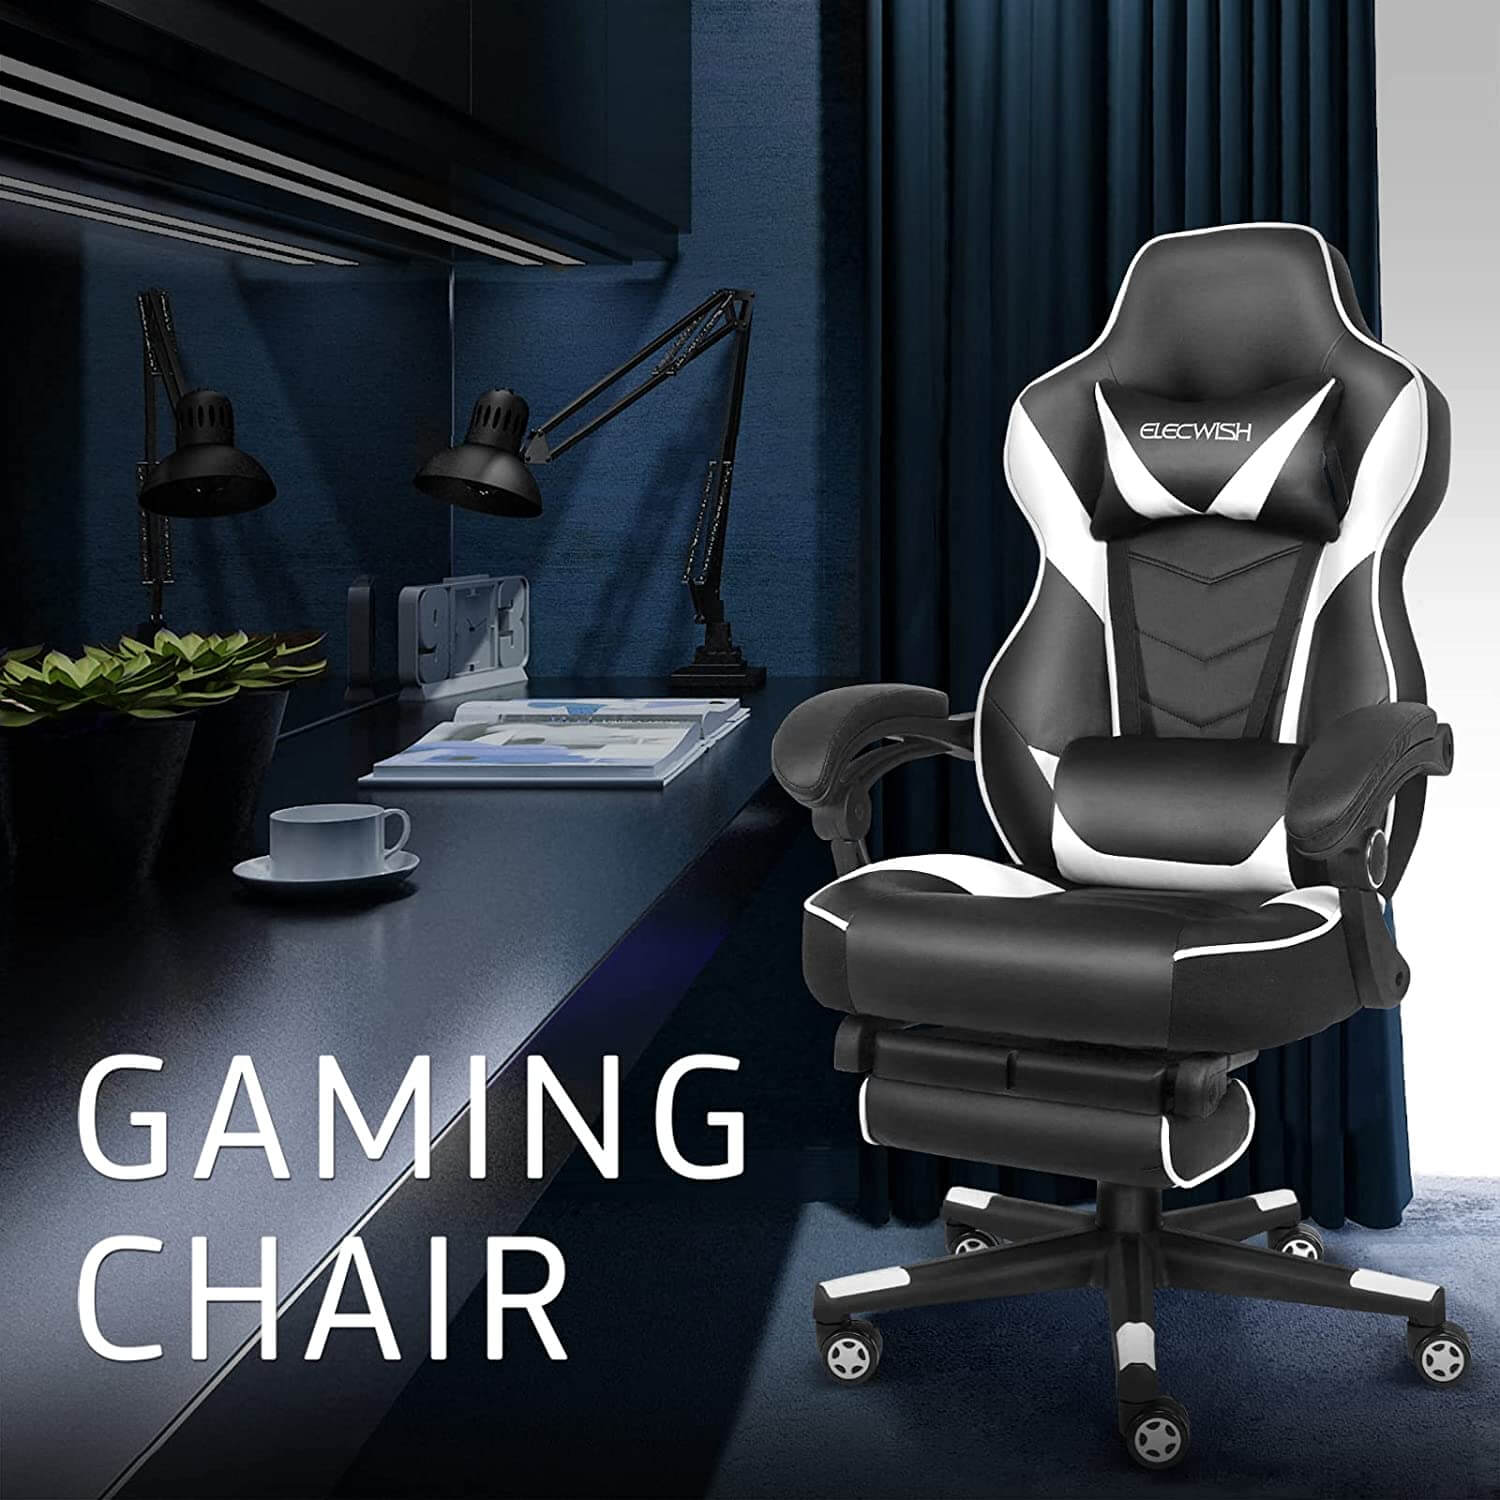 Elecwish white massage gaming chair with footrest OC112 display